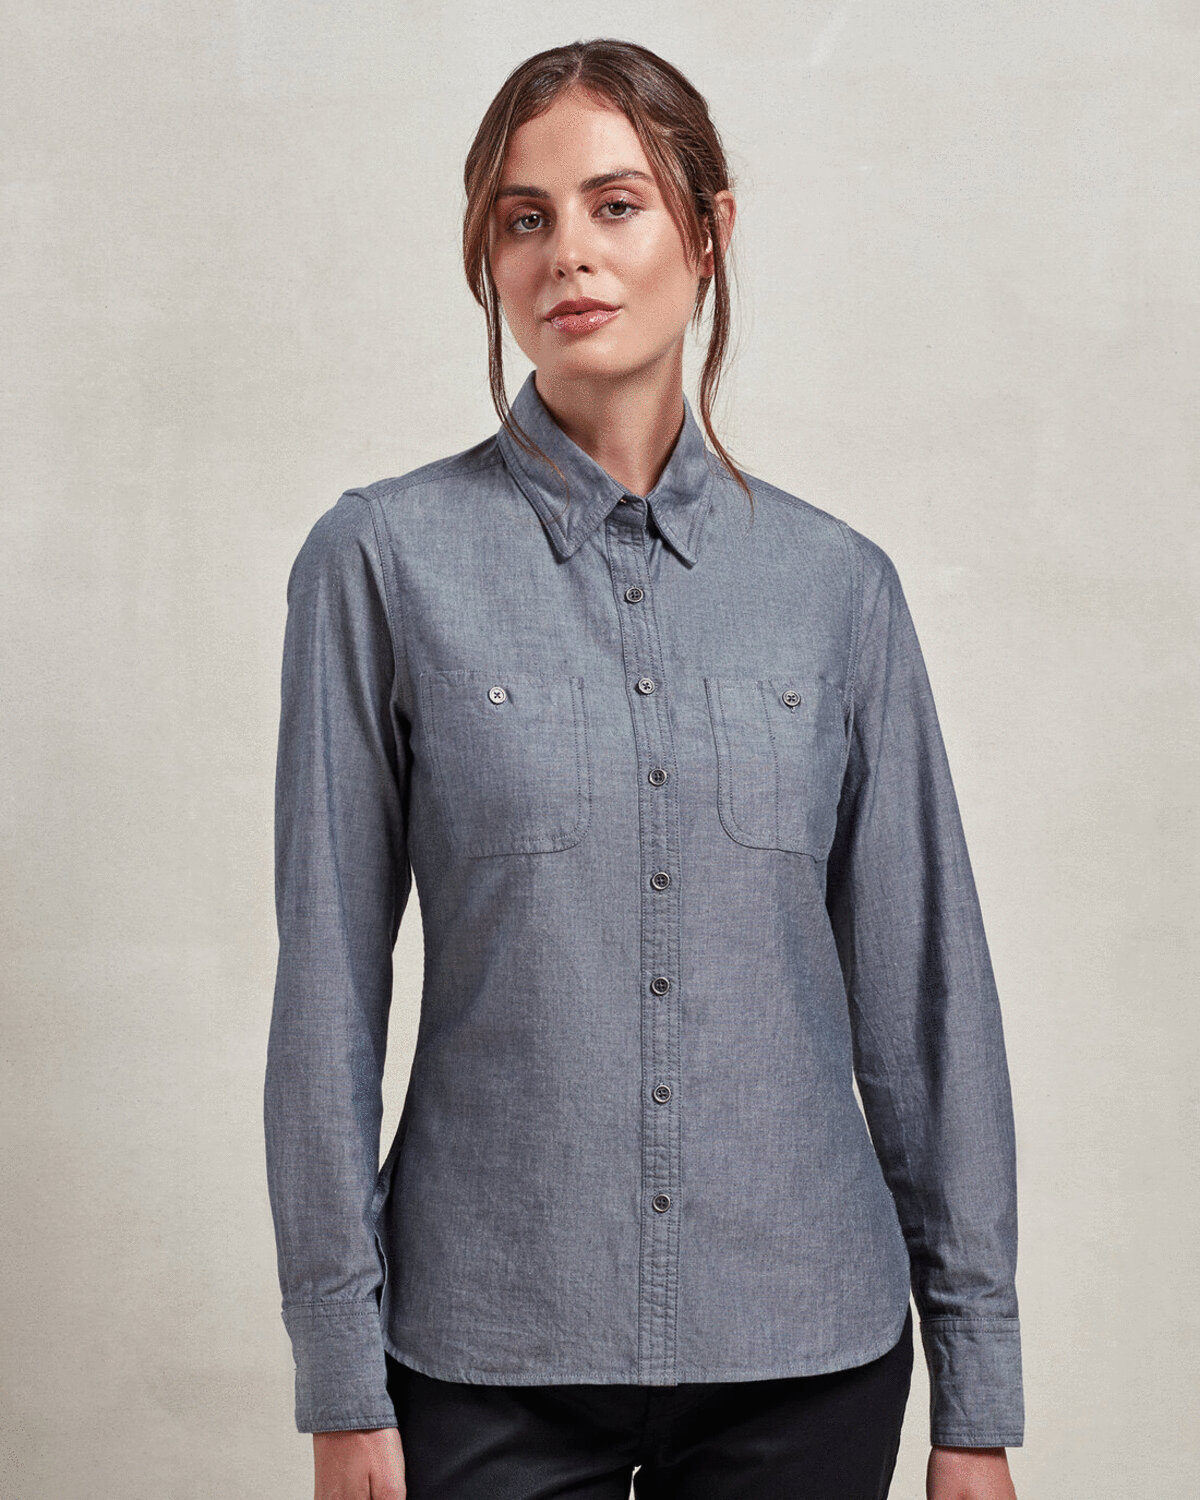 PR347M-FAIRTRADE AND ORGANIC CERTIFIED LADIES LONG SLEEVE CHAMBRAY COTTON SHIRT